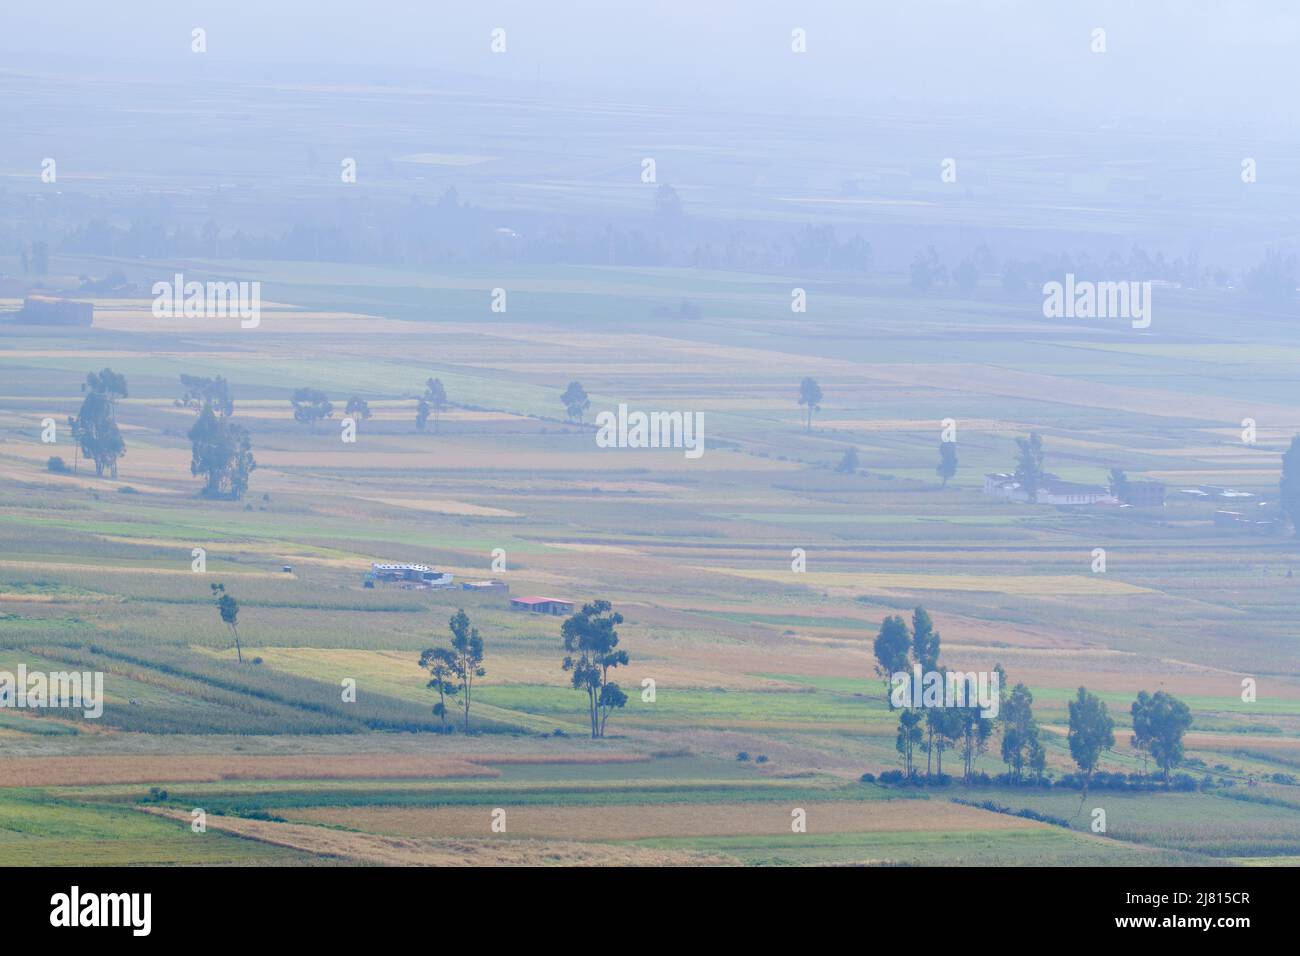 Scenario of agricultural crops in the Mantaro Valley at dawn even with fog. Stock Photo